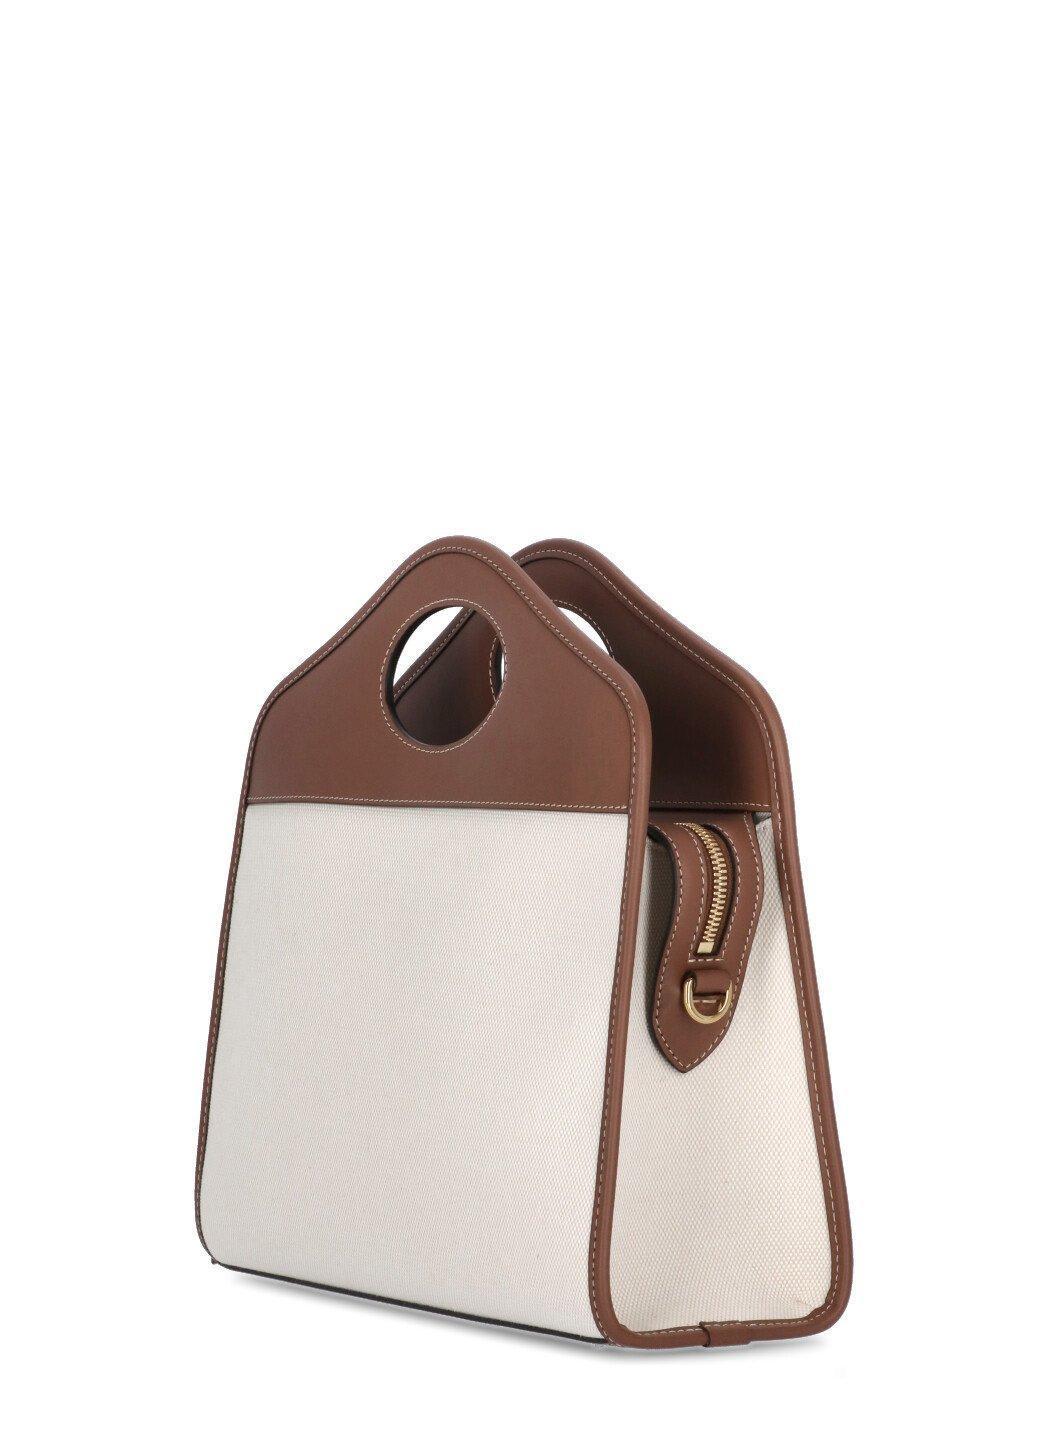 Burberry Small two-tone Canvas And Leather TB Bag - Farfetch